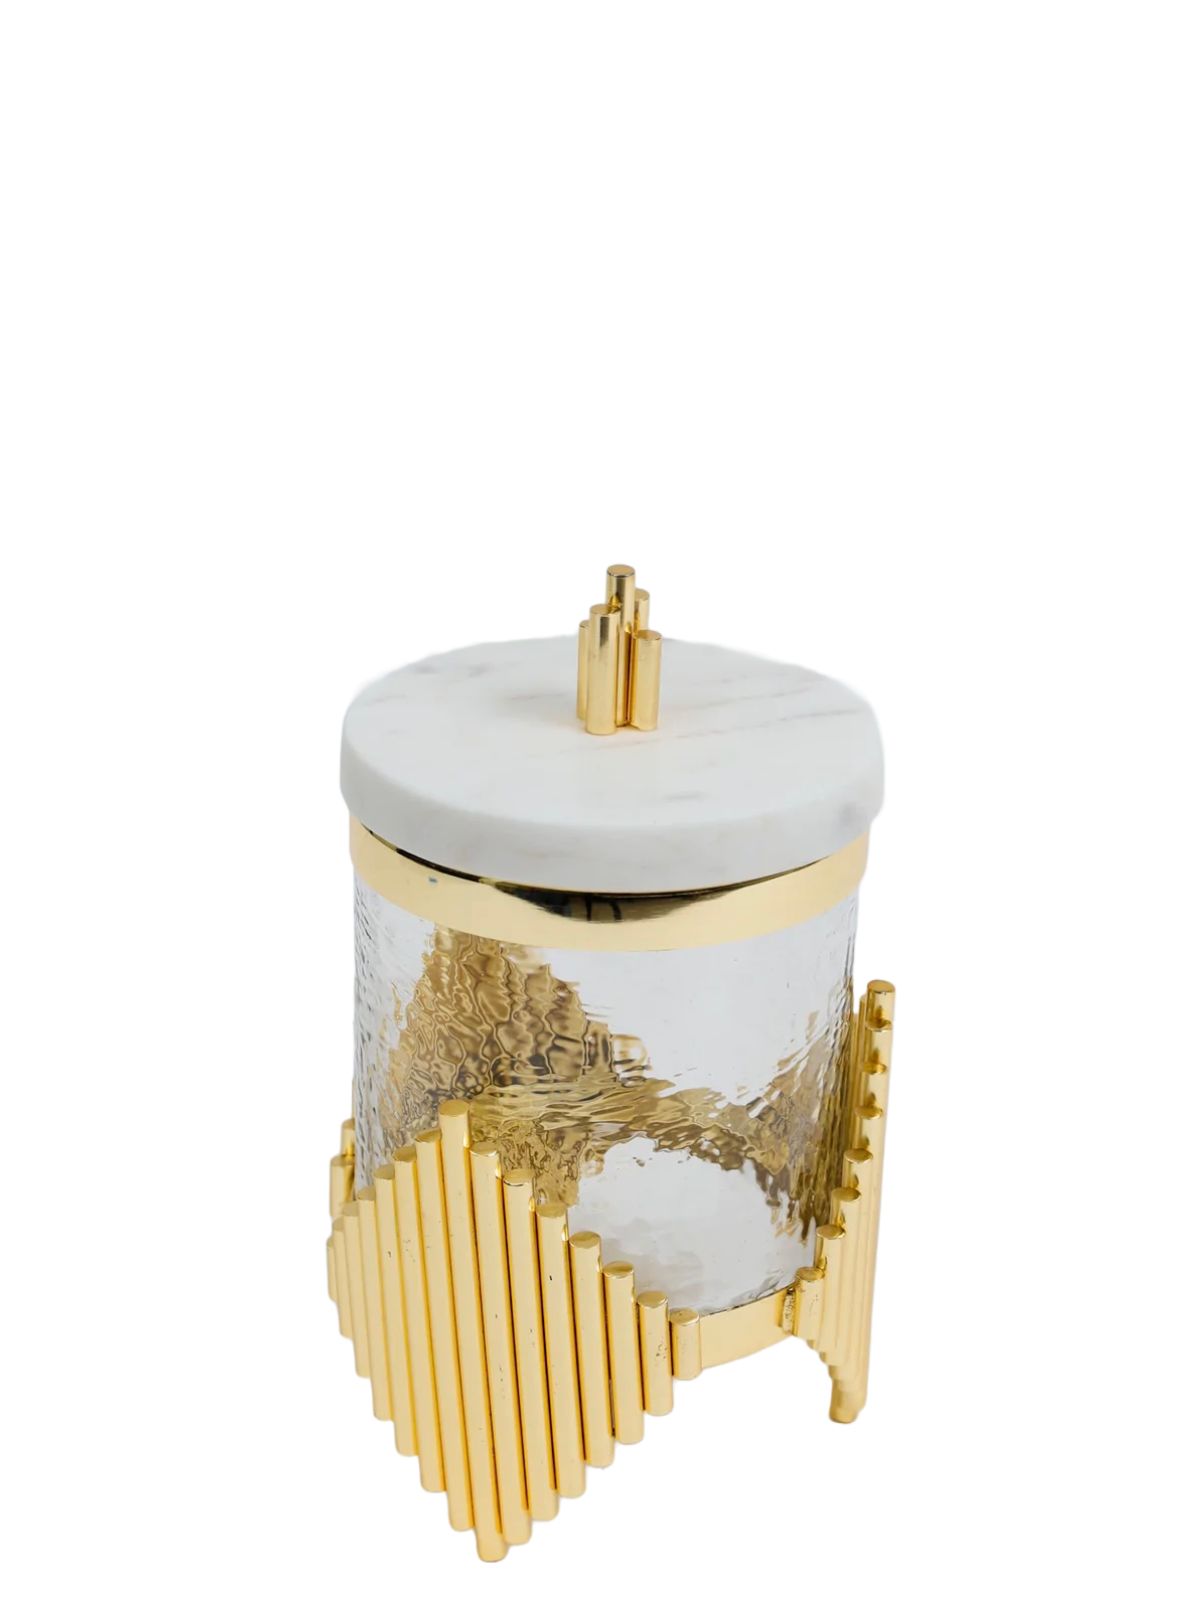 7H Luxurious glass canisters with gold metal diamond shaped base and marble lid - KYA Home Decor.